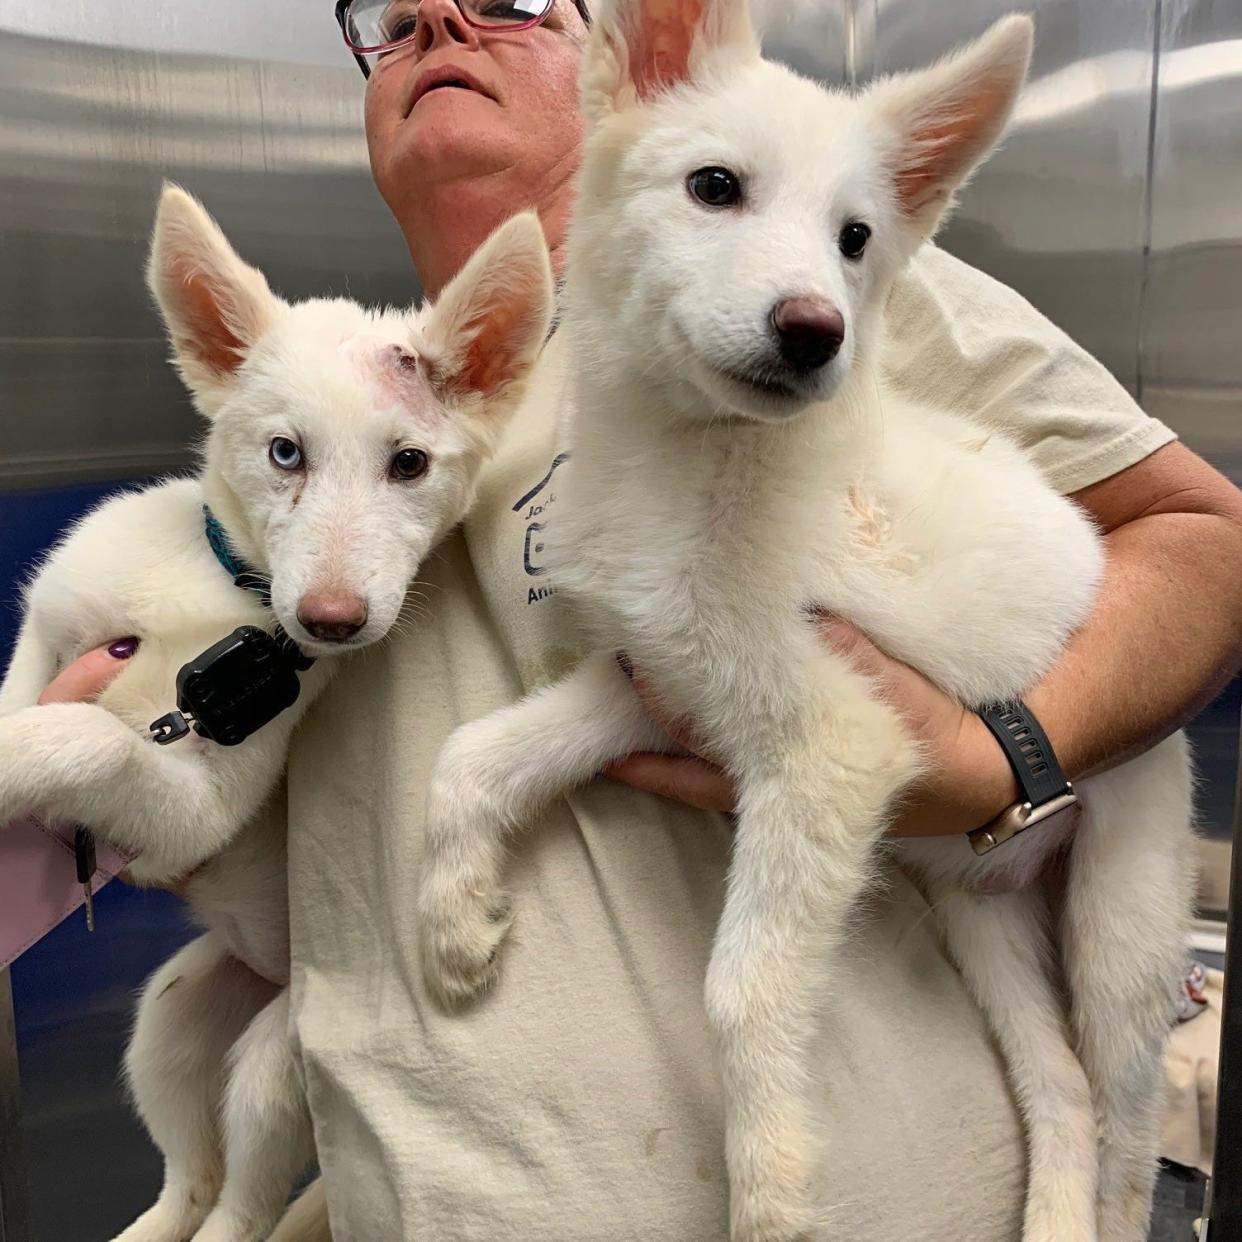 Two Husky puppies who were thrown over the fence in September at the Jackson County Animal Shelter in Jackson, Michigan. They were malnourished with some injuries.